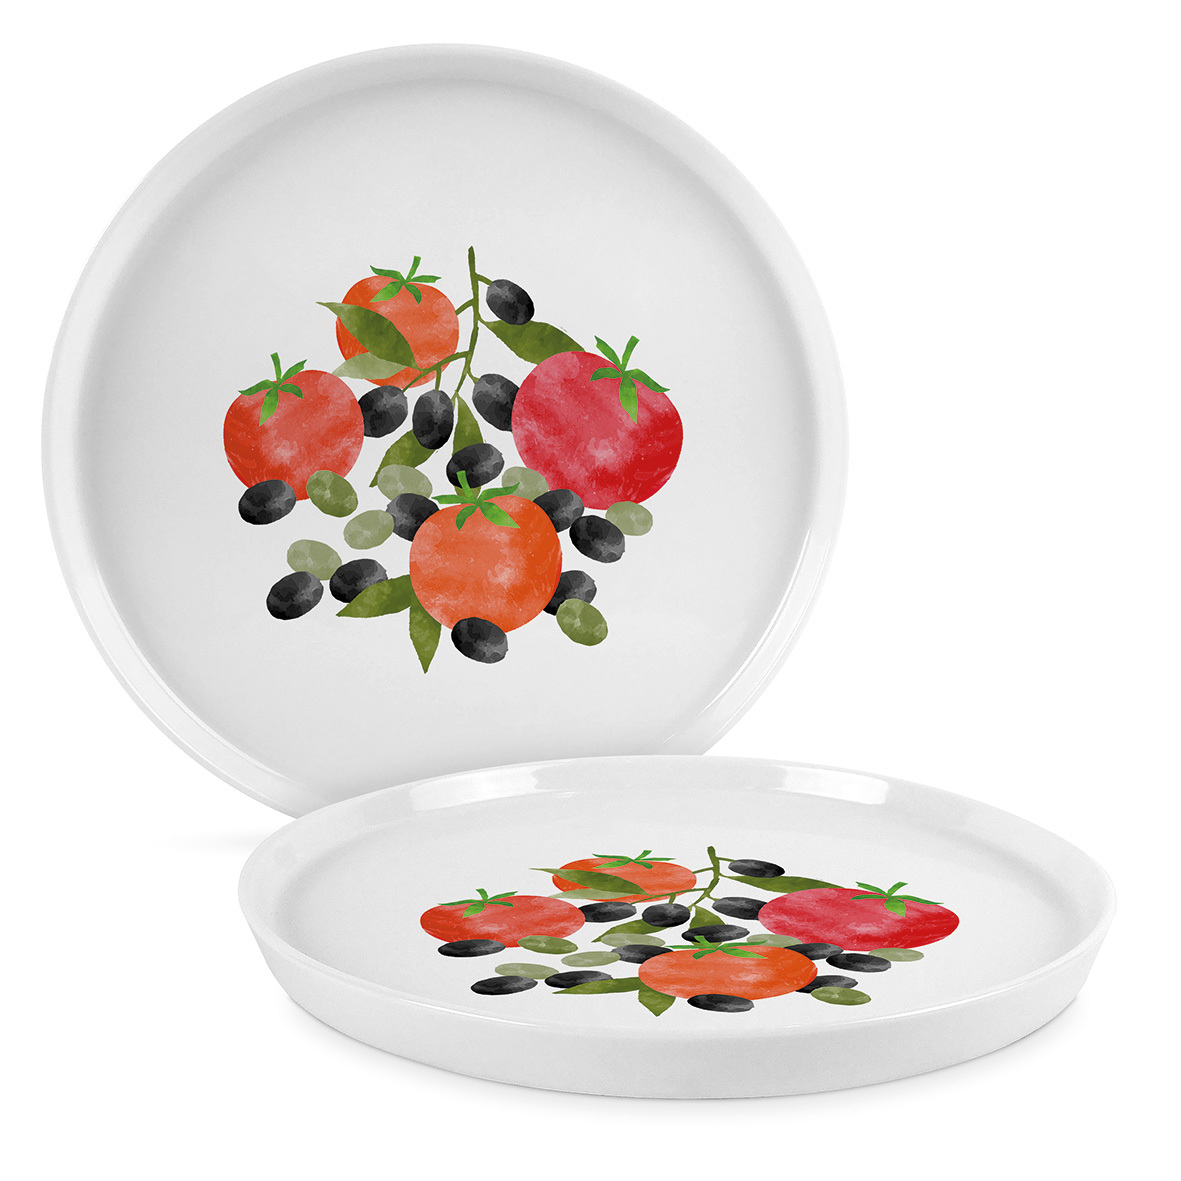 Tomatoes & Olives Trend Plate 27